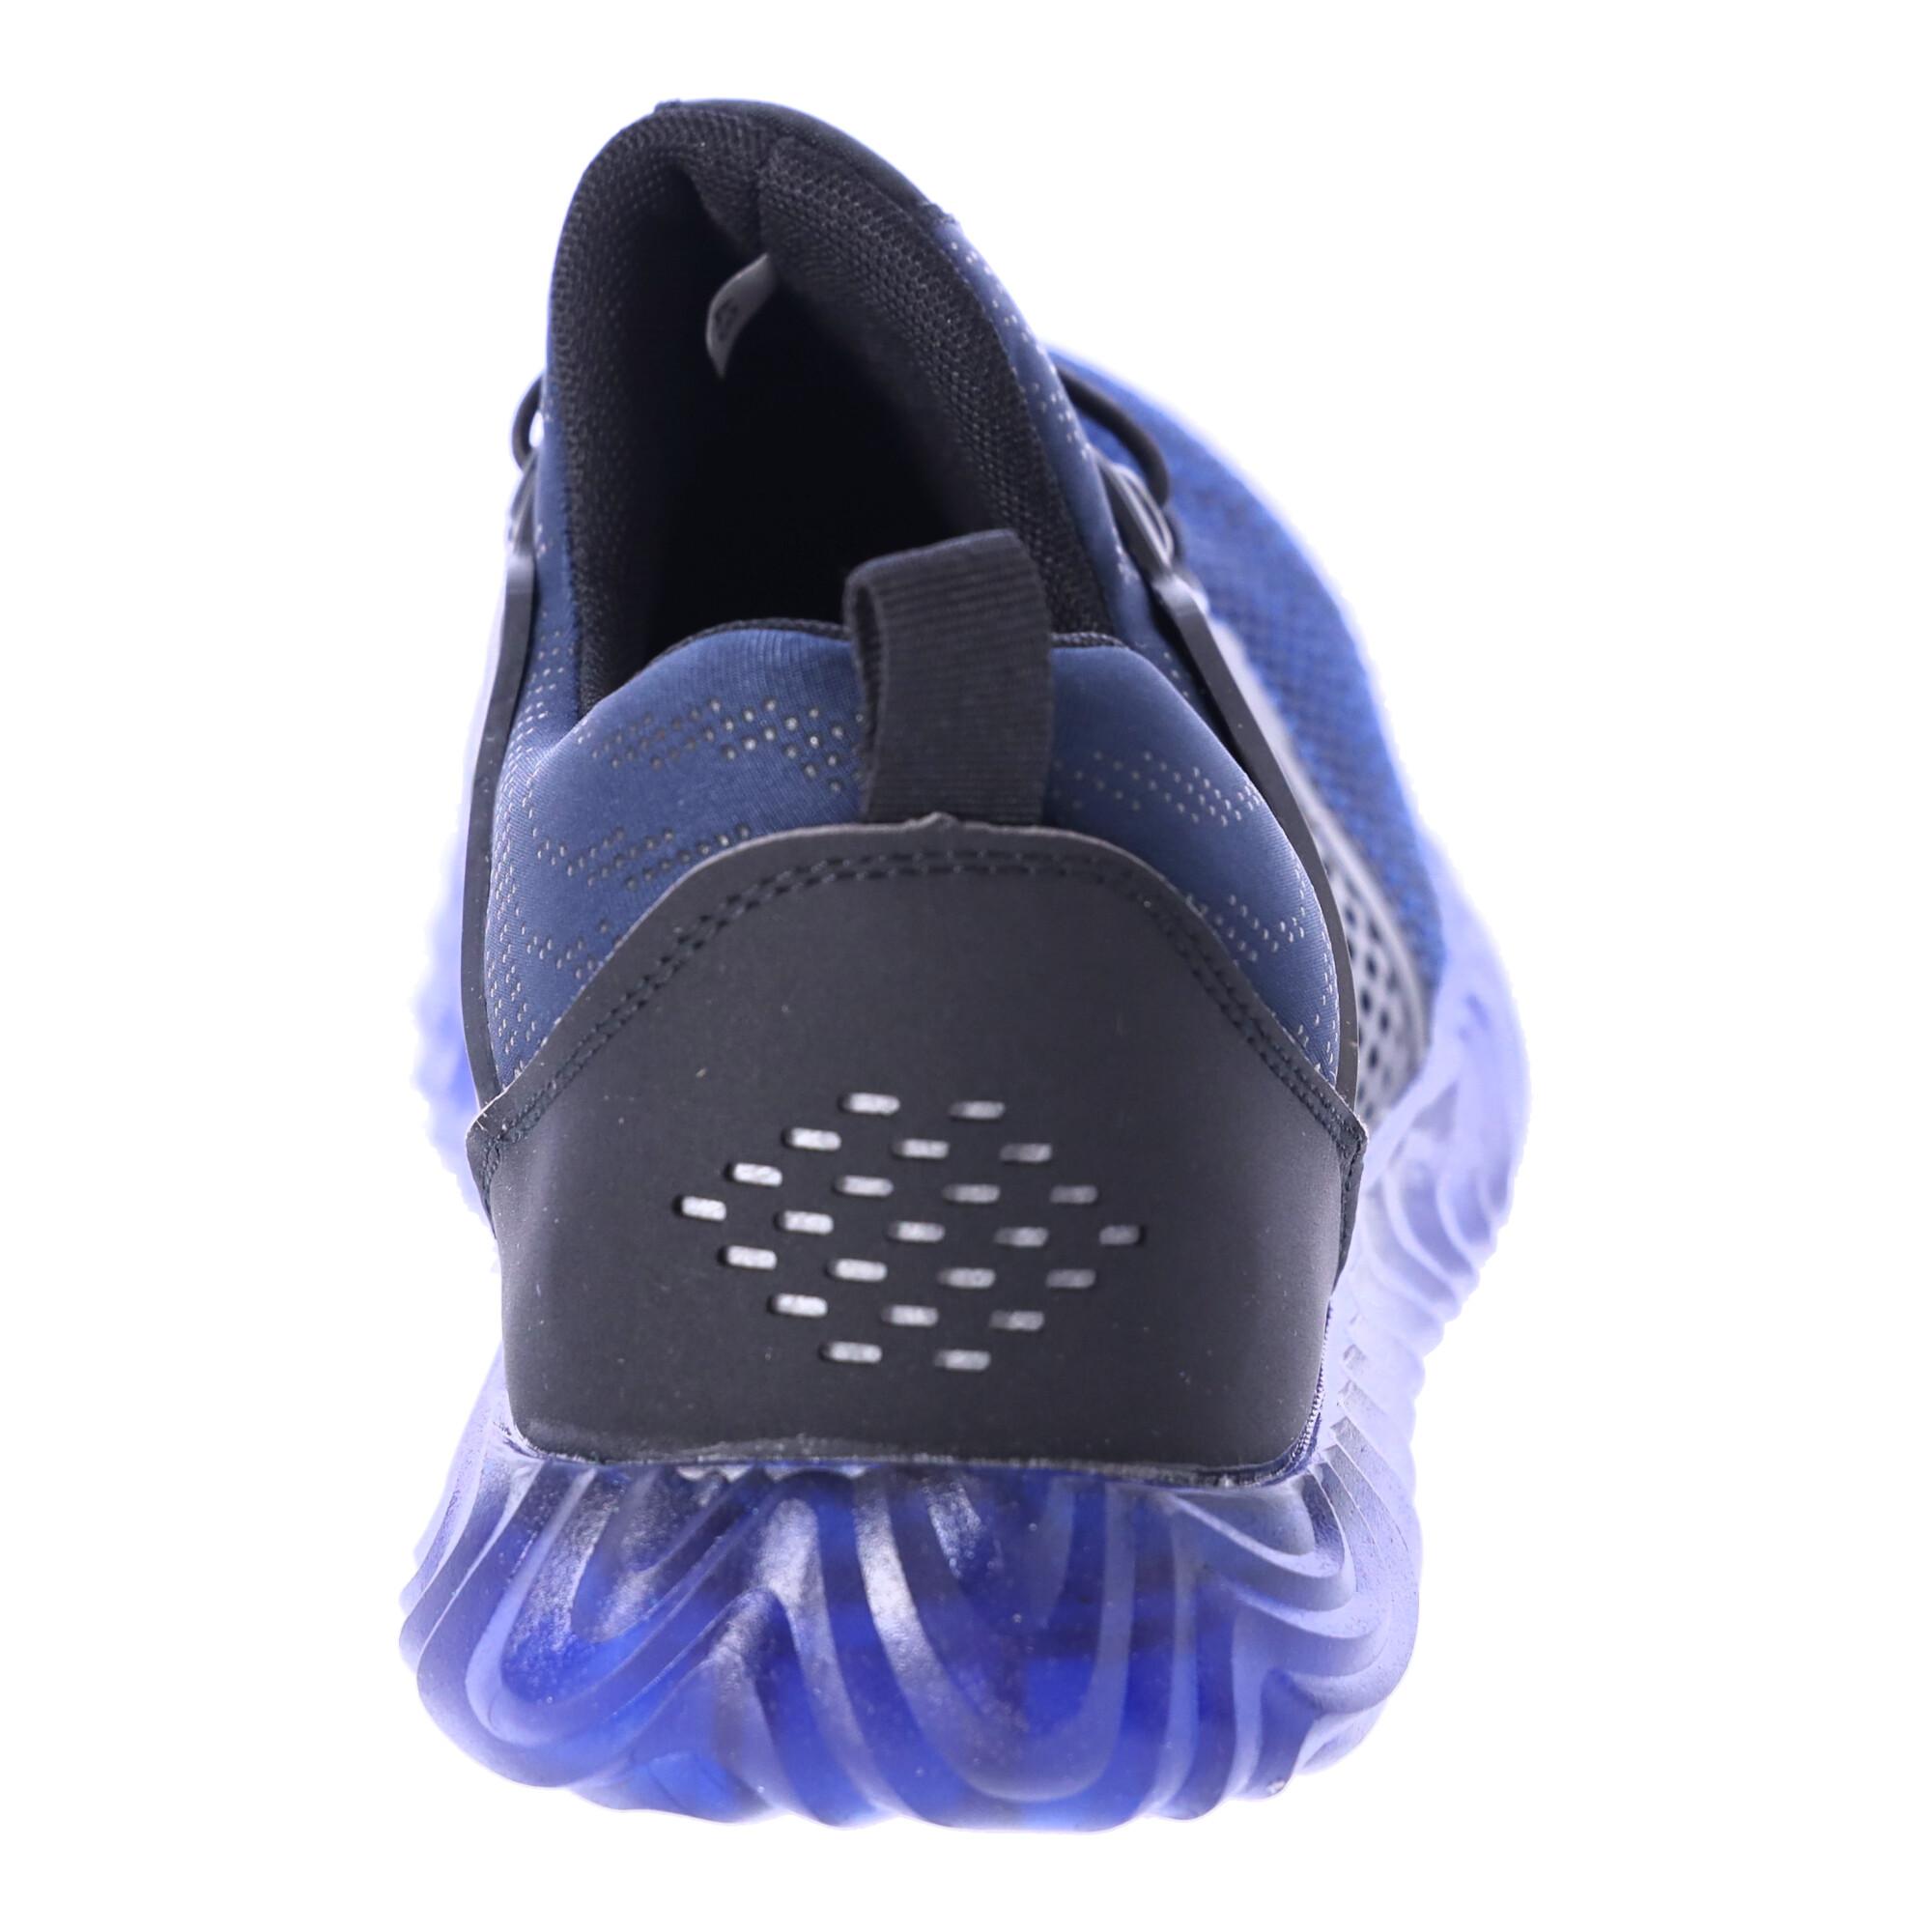 Work safety shoes "41" - navy blue